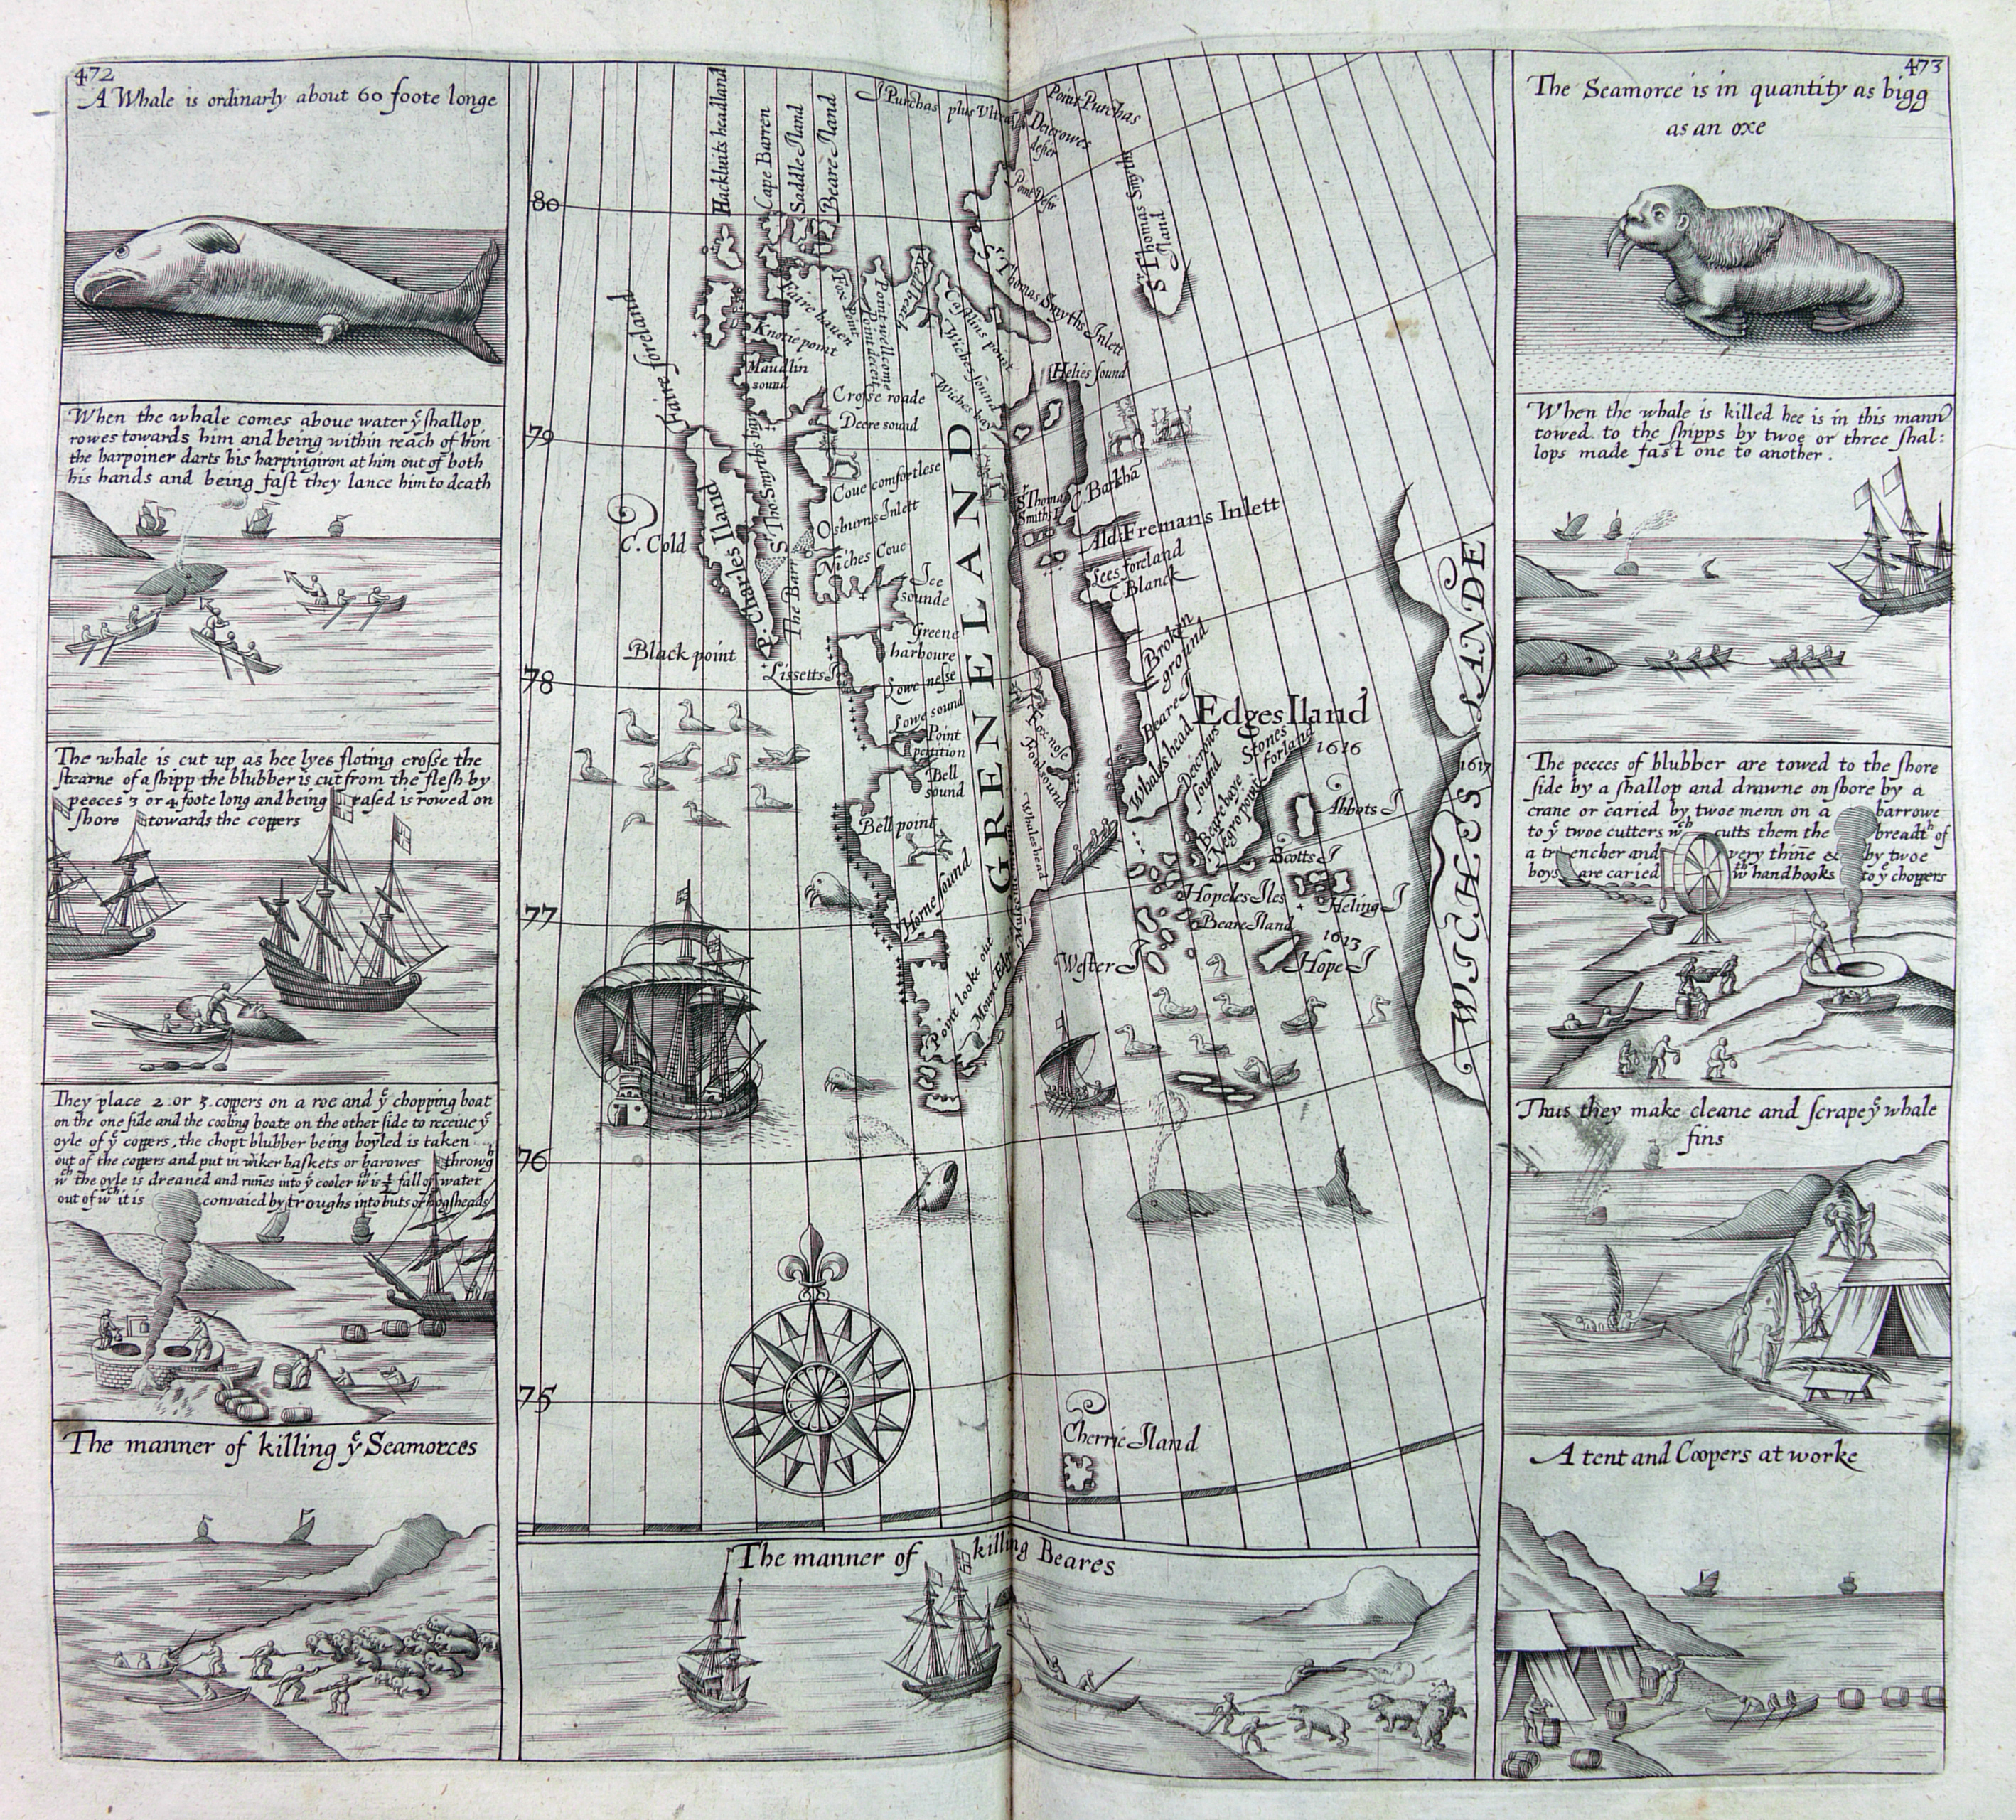 A map of Greenland taken from a printed book. Panels at the edges describe the hunting of whales, walruses and bears.